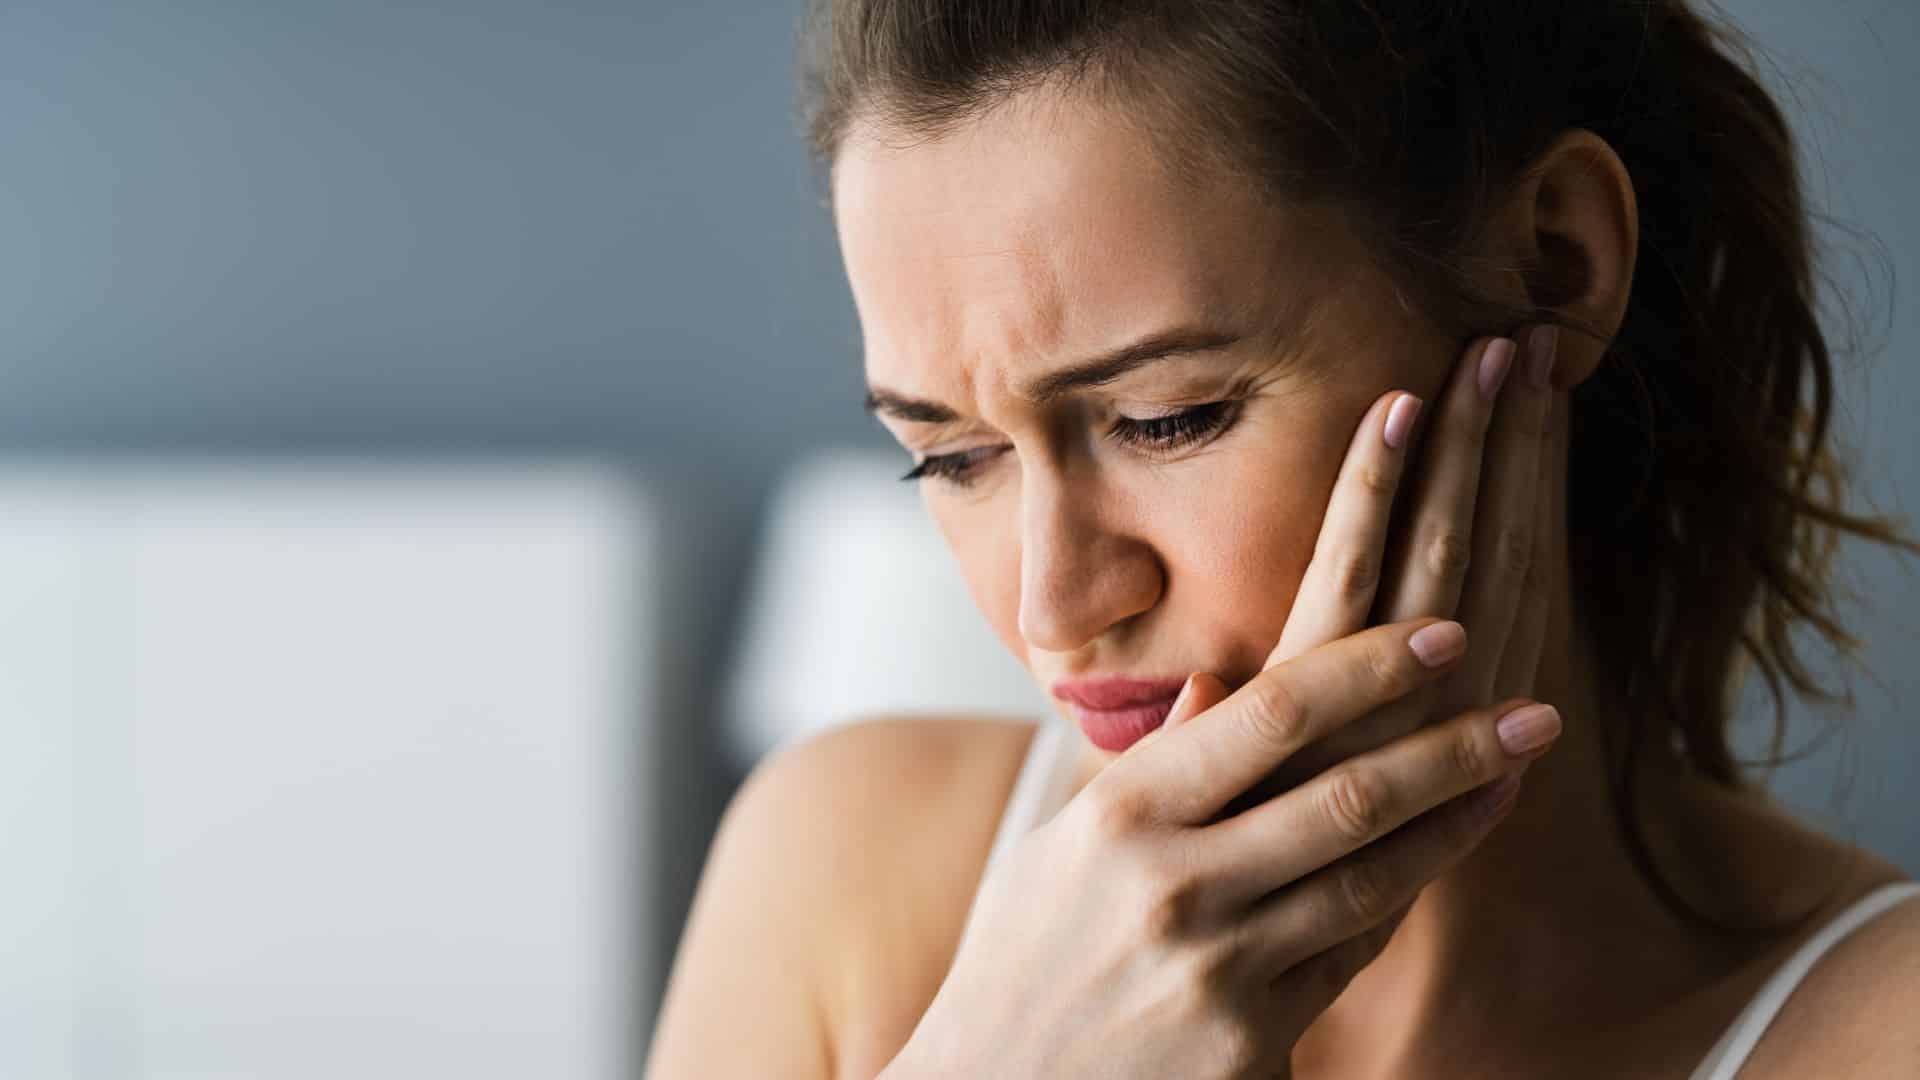 Cracked Tooth or Throbbing Pain? When to See an Emergency Dentist